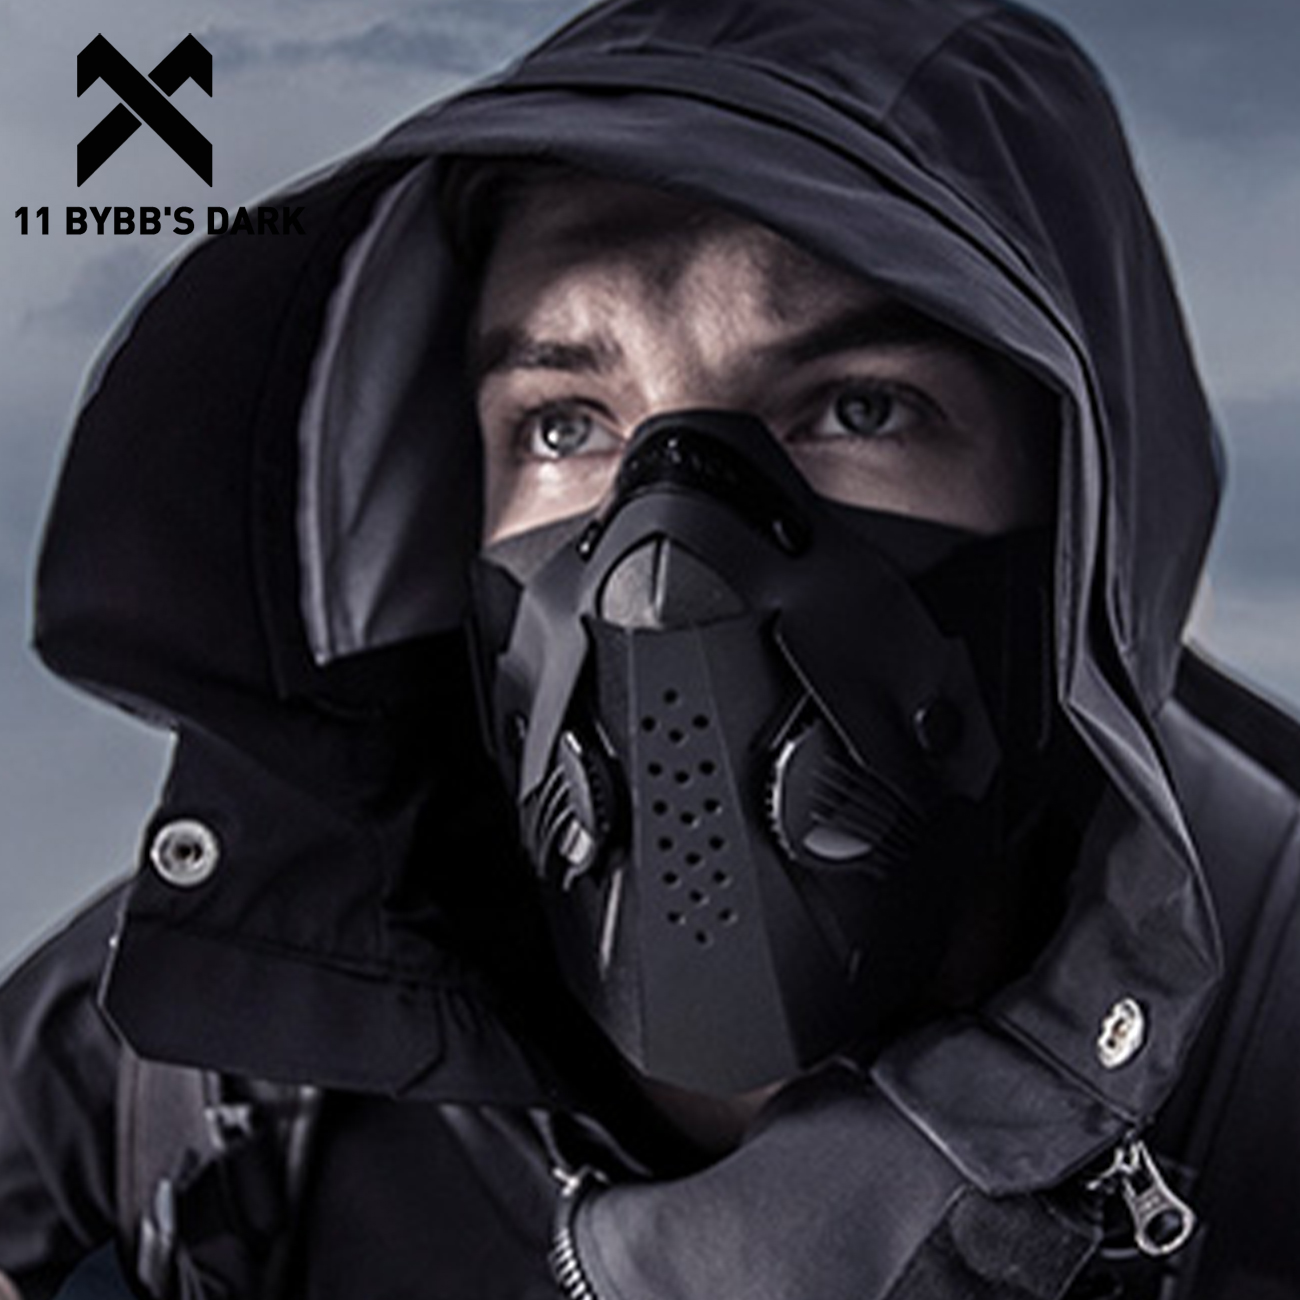 11 DARK Hop Streetwear Patchwork Face Mask 2022 Tactical Function Personality Riding FACE Mask Dustproof Unsiex - Price history & Review | AliExpress Seller 11 BYBBS DARK Store | Alitools.io